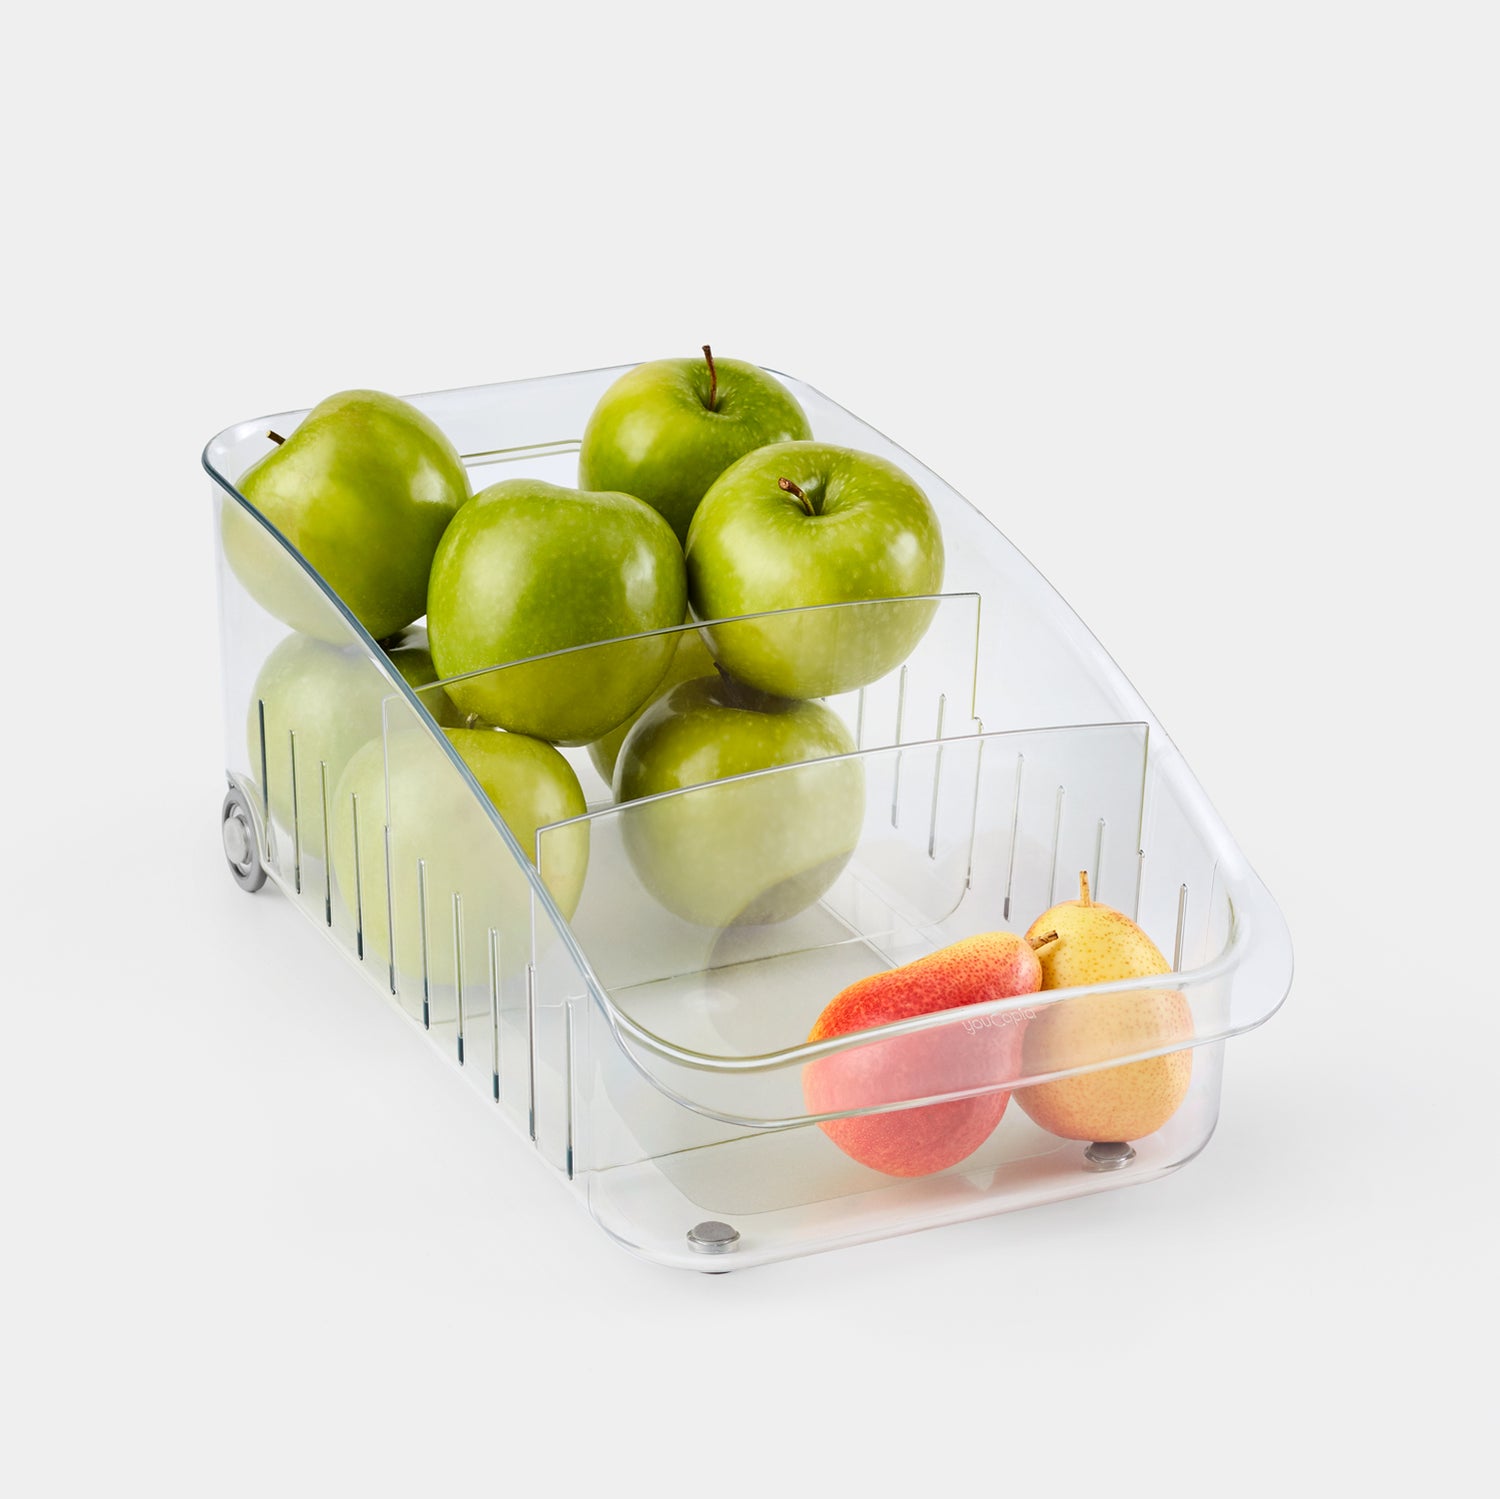 The YouCopia Roll-Out Fridge Caddy Is a Smart Storage Upgrade